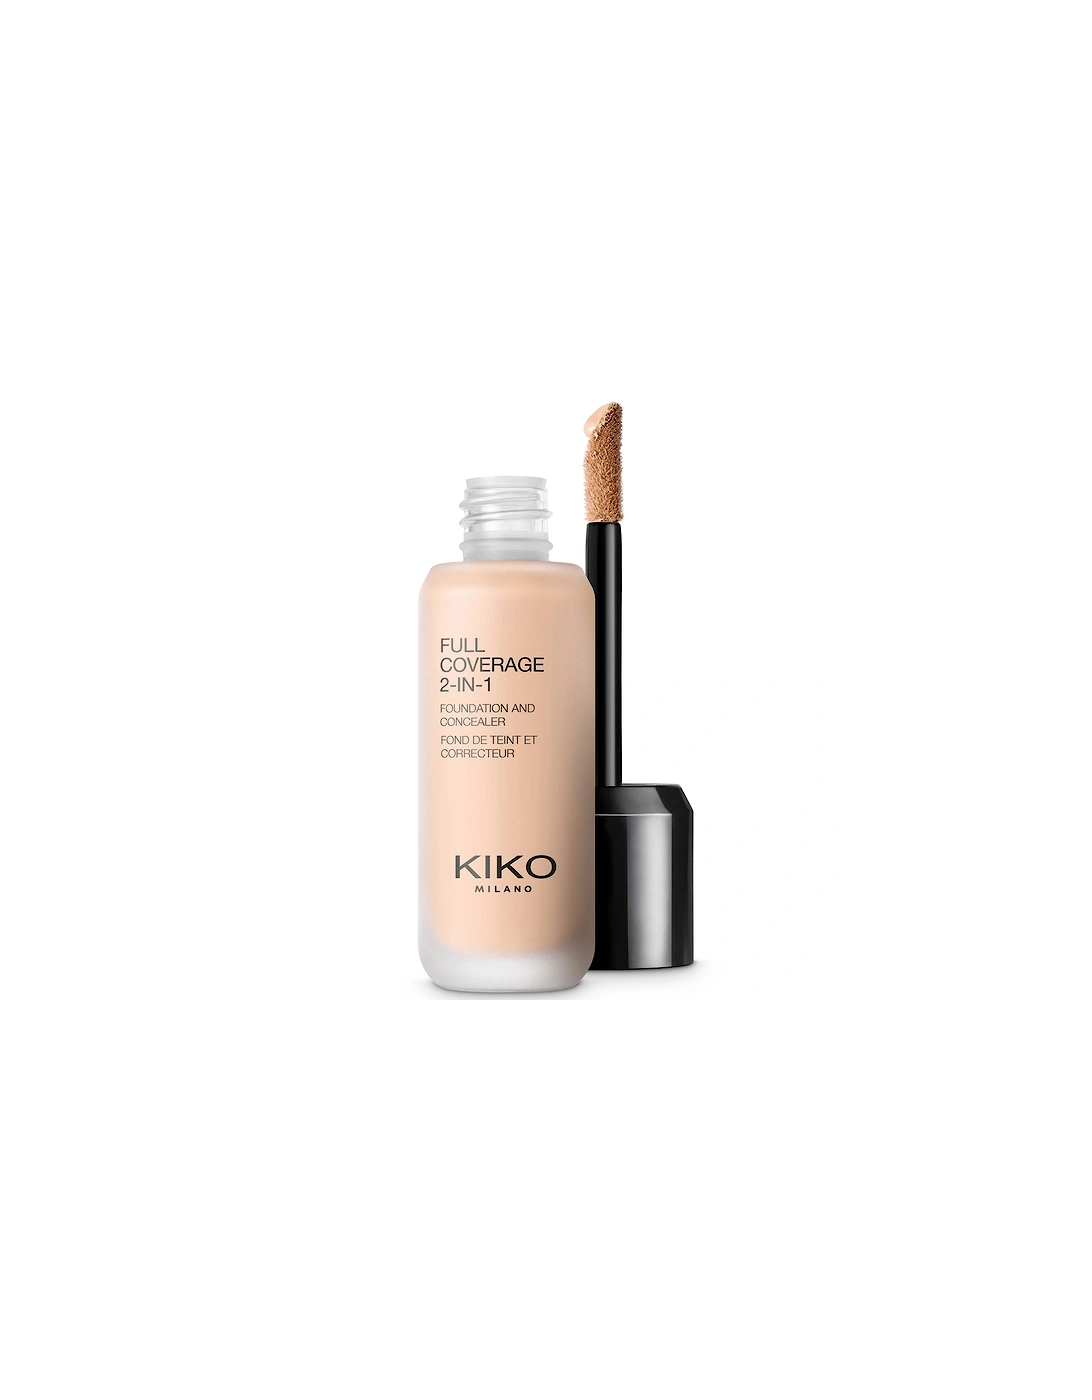 Full Coverage 2-in-1 Foundation and Concealer 25ml - 15 Warm Rose, 2 of 1